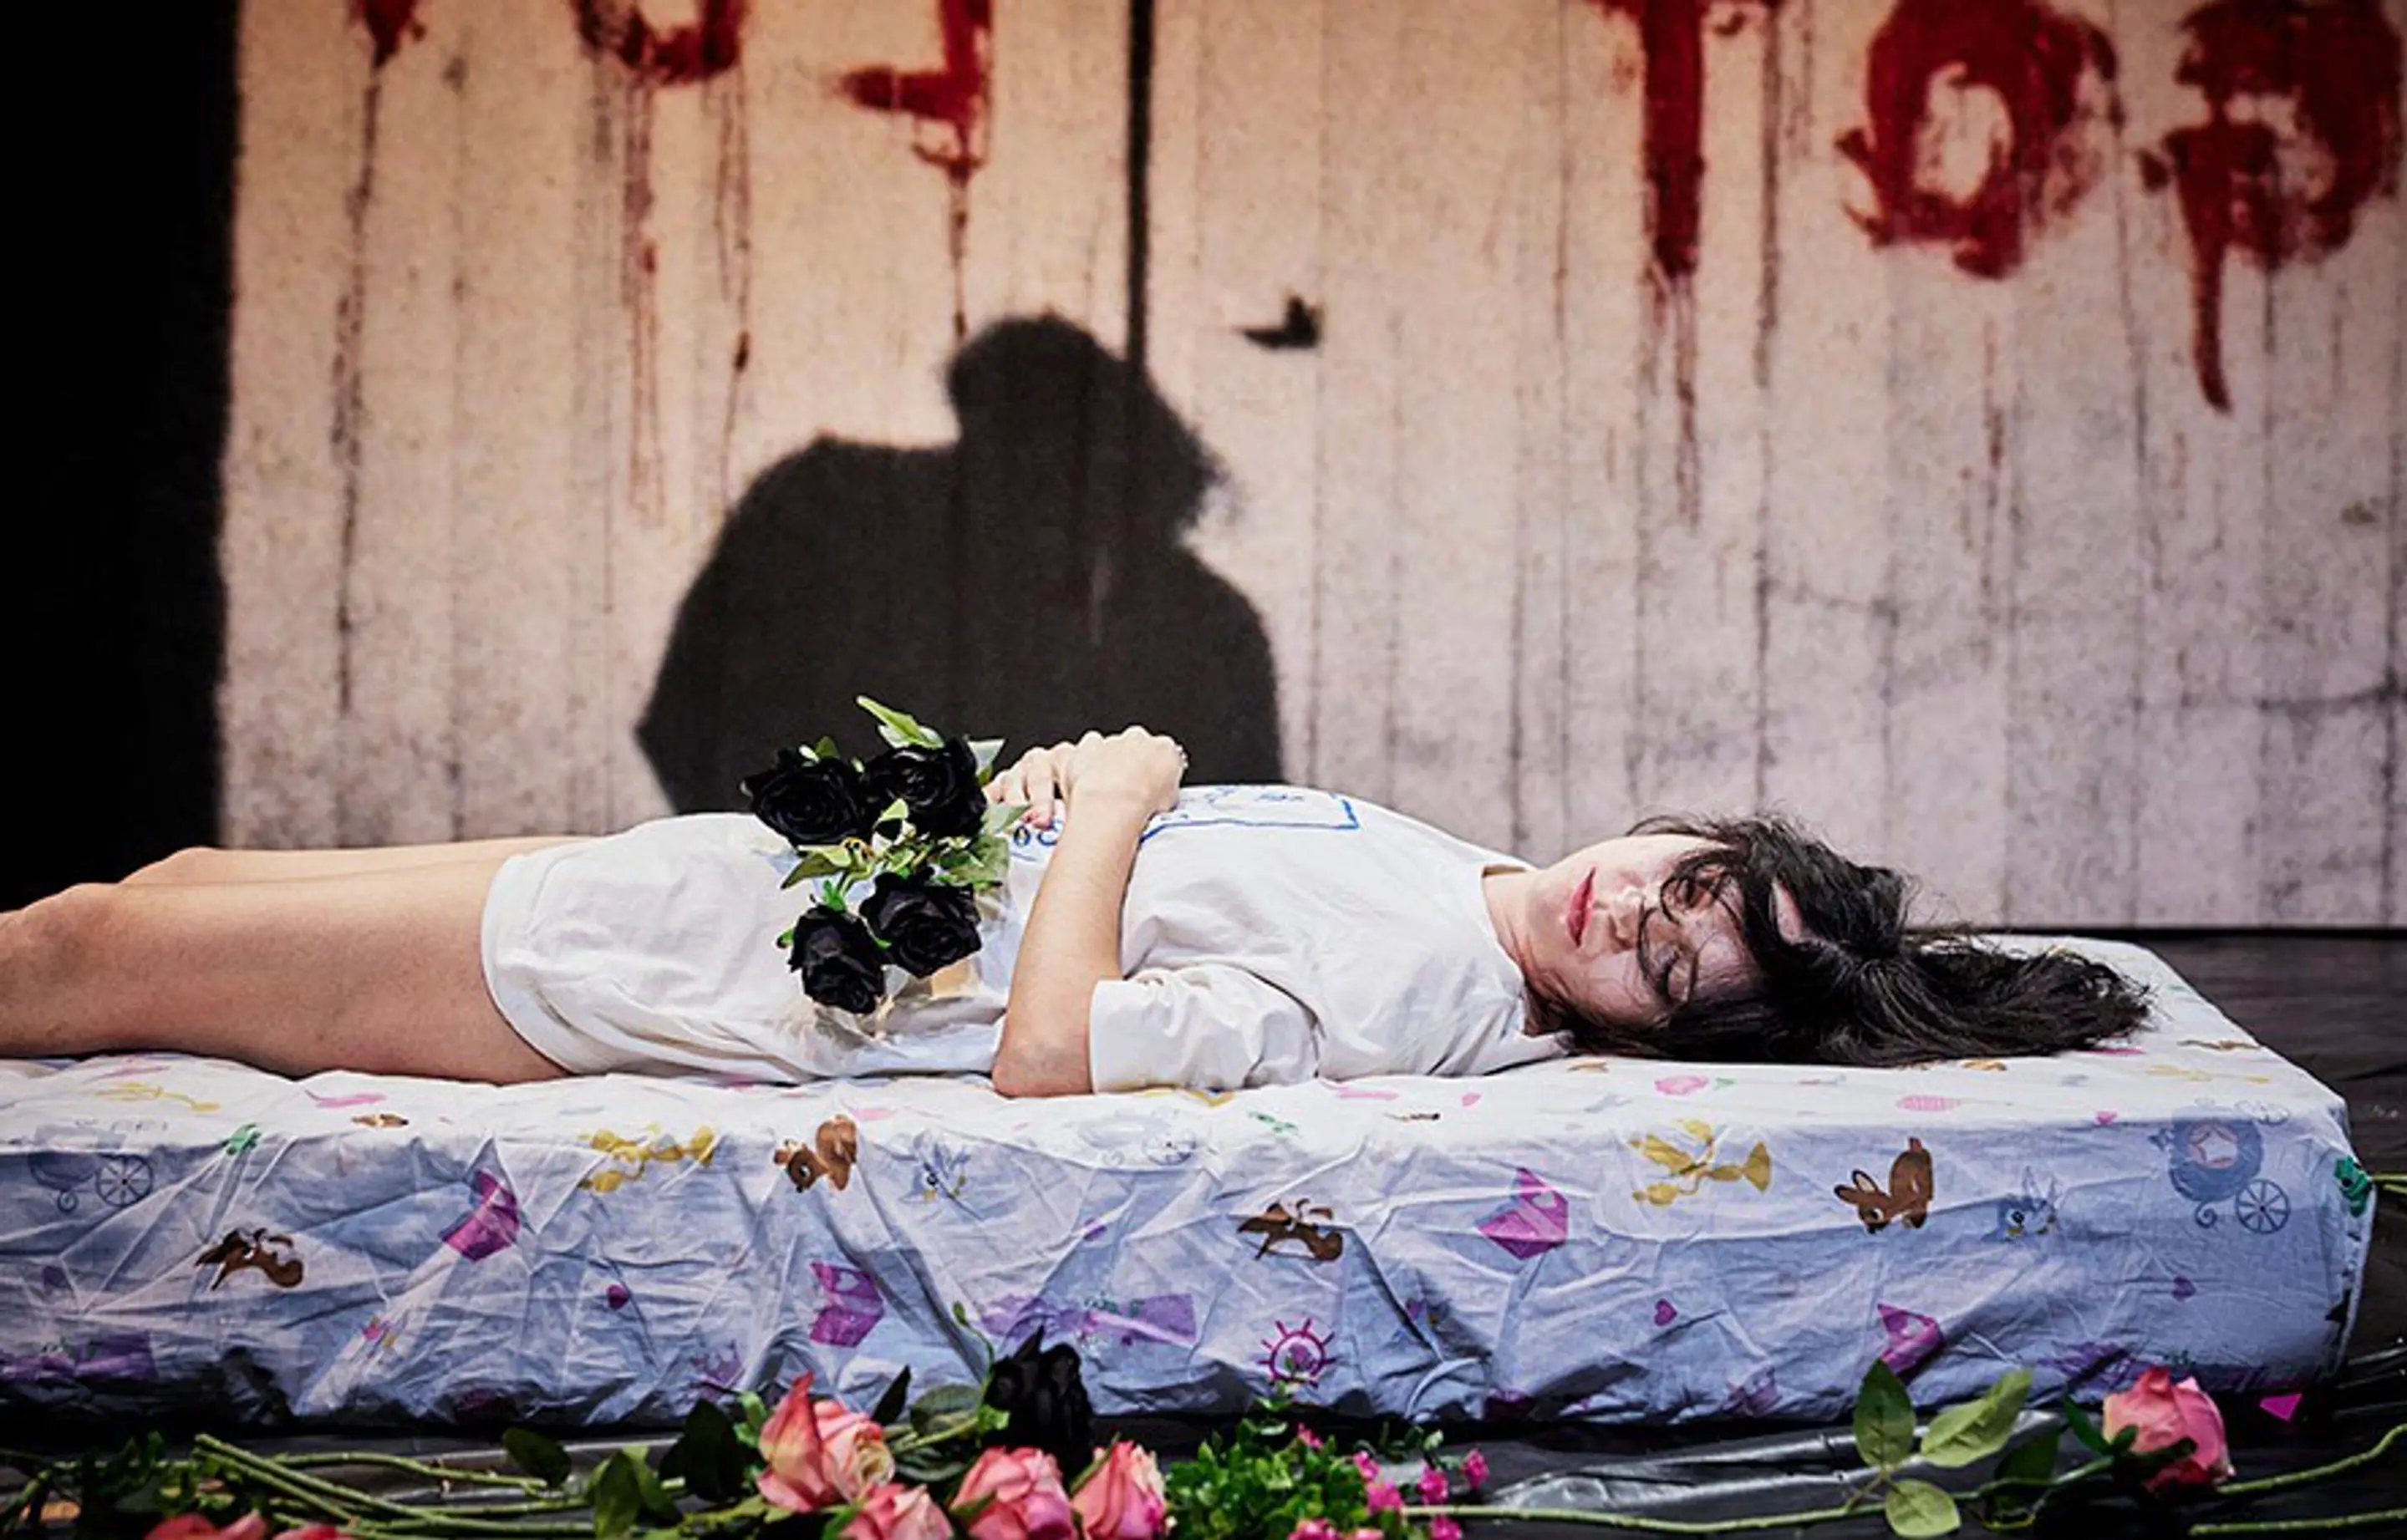 A woman lies sleeping on a mattress surrounded by roses. Her face turned to the camera. "She Got Love" is scrawled on the wall behind her in red paint.